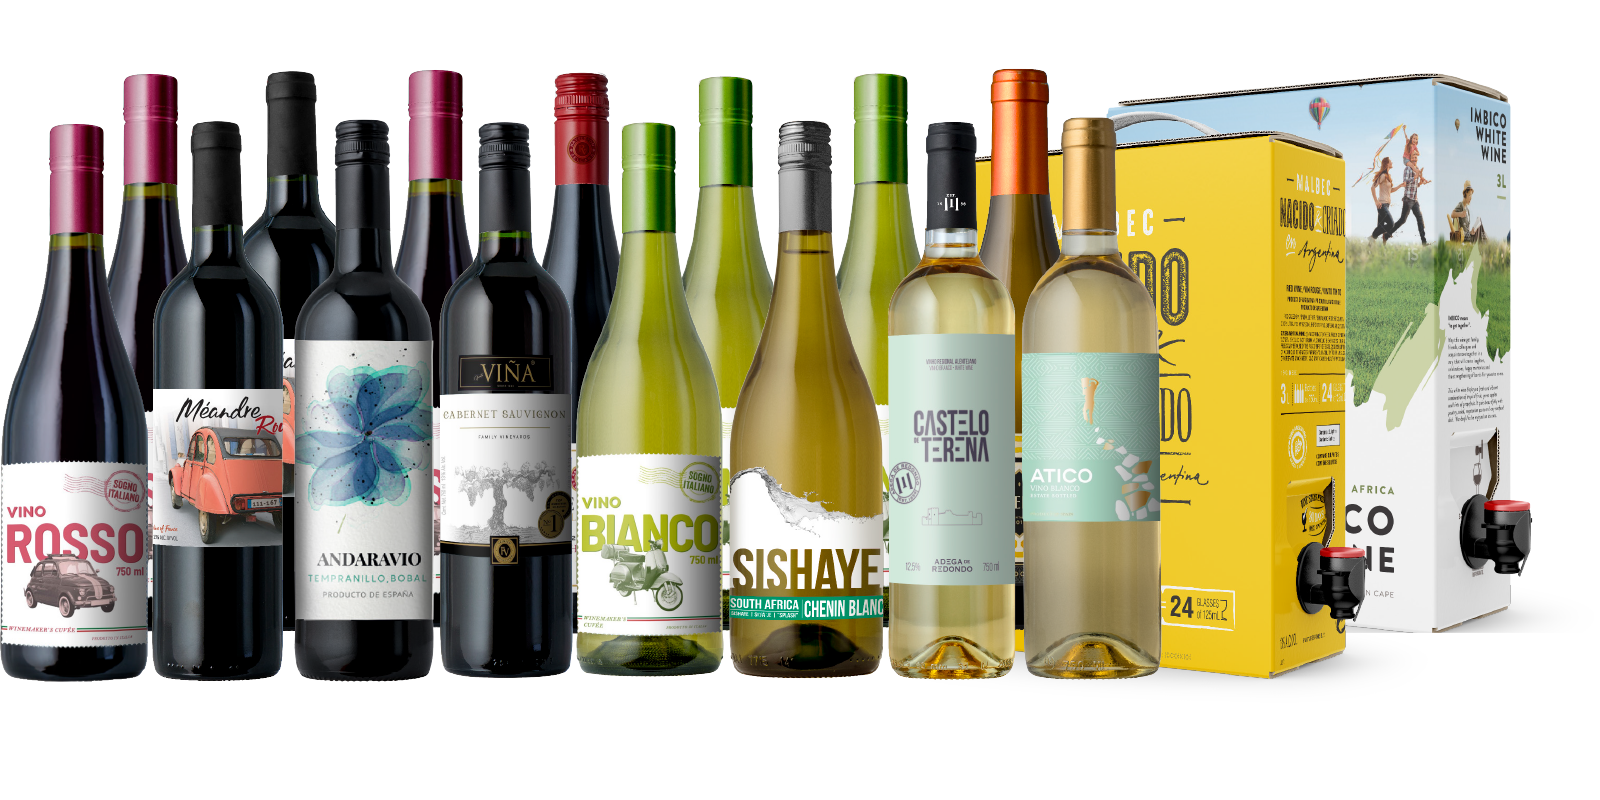 BEST PRICE EVER: The Biggest Vineyard Box Ever is BACK!